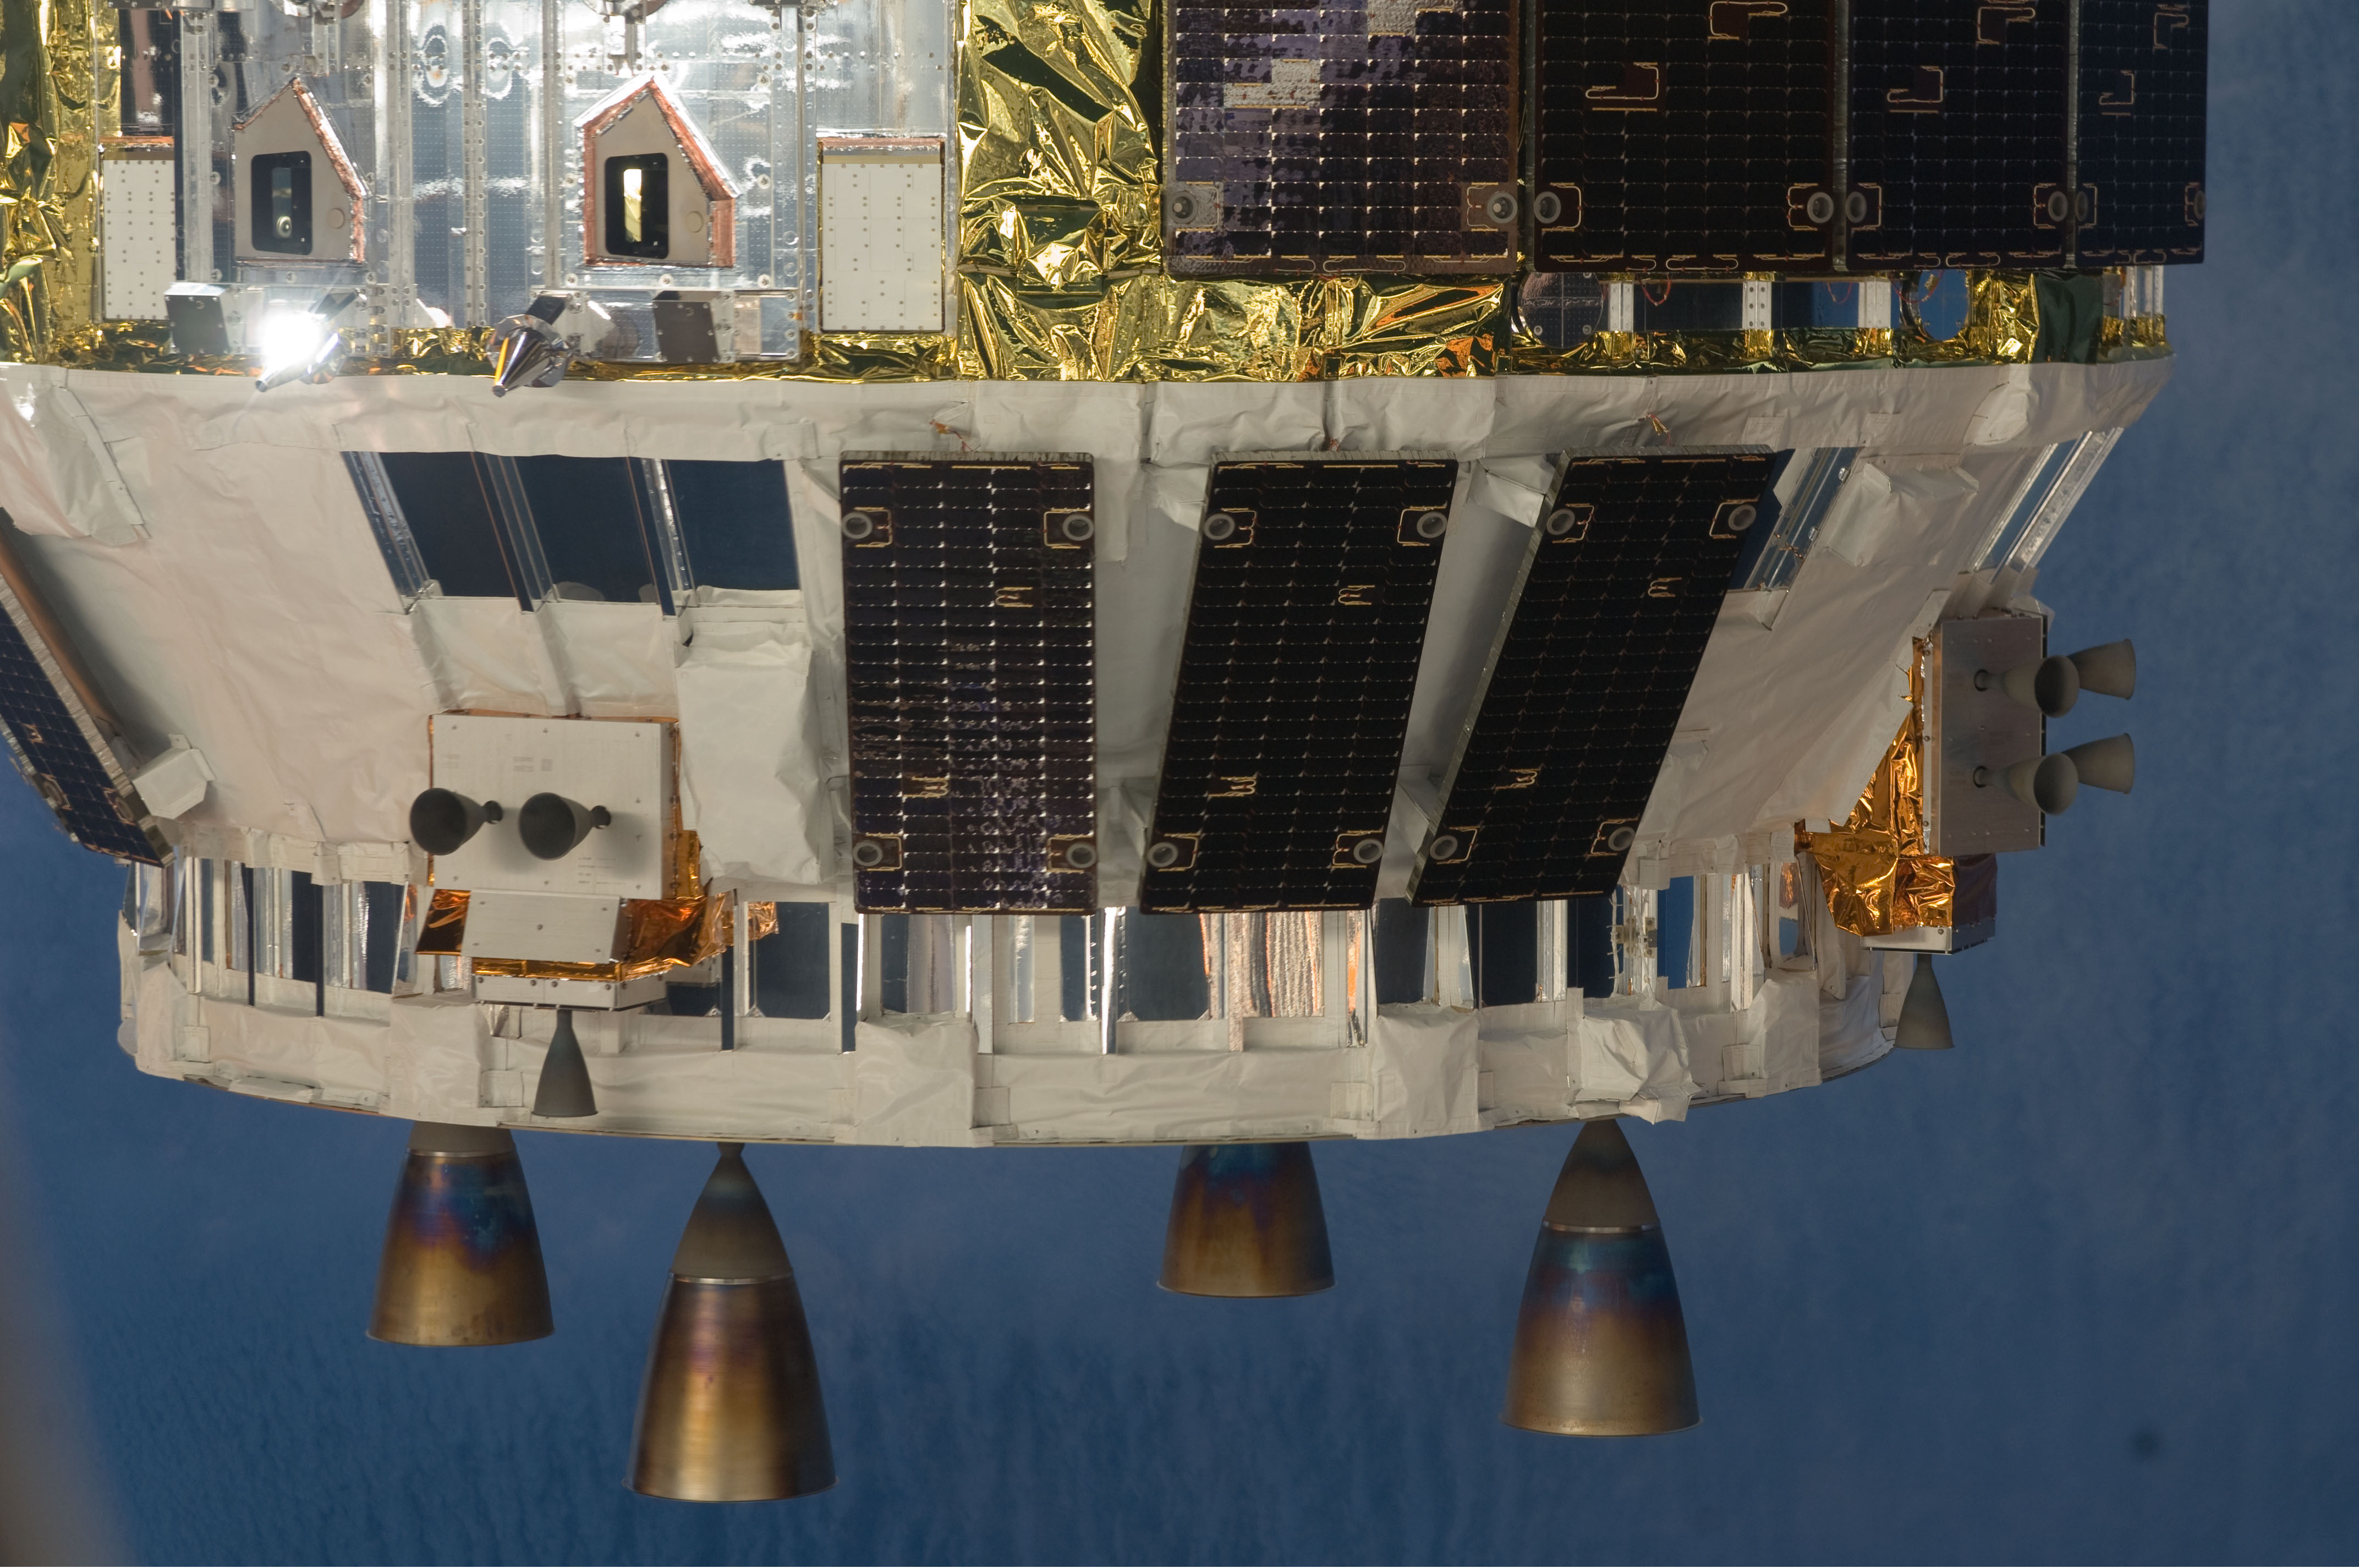 HTV-1 close-up view